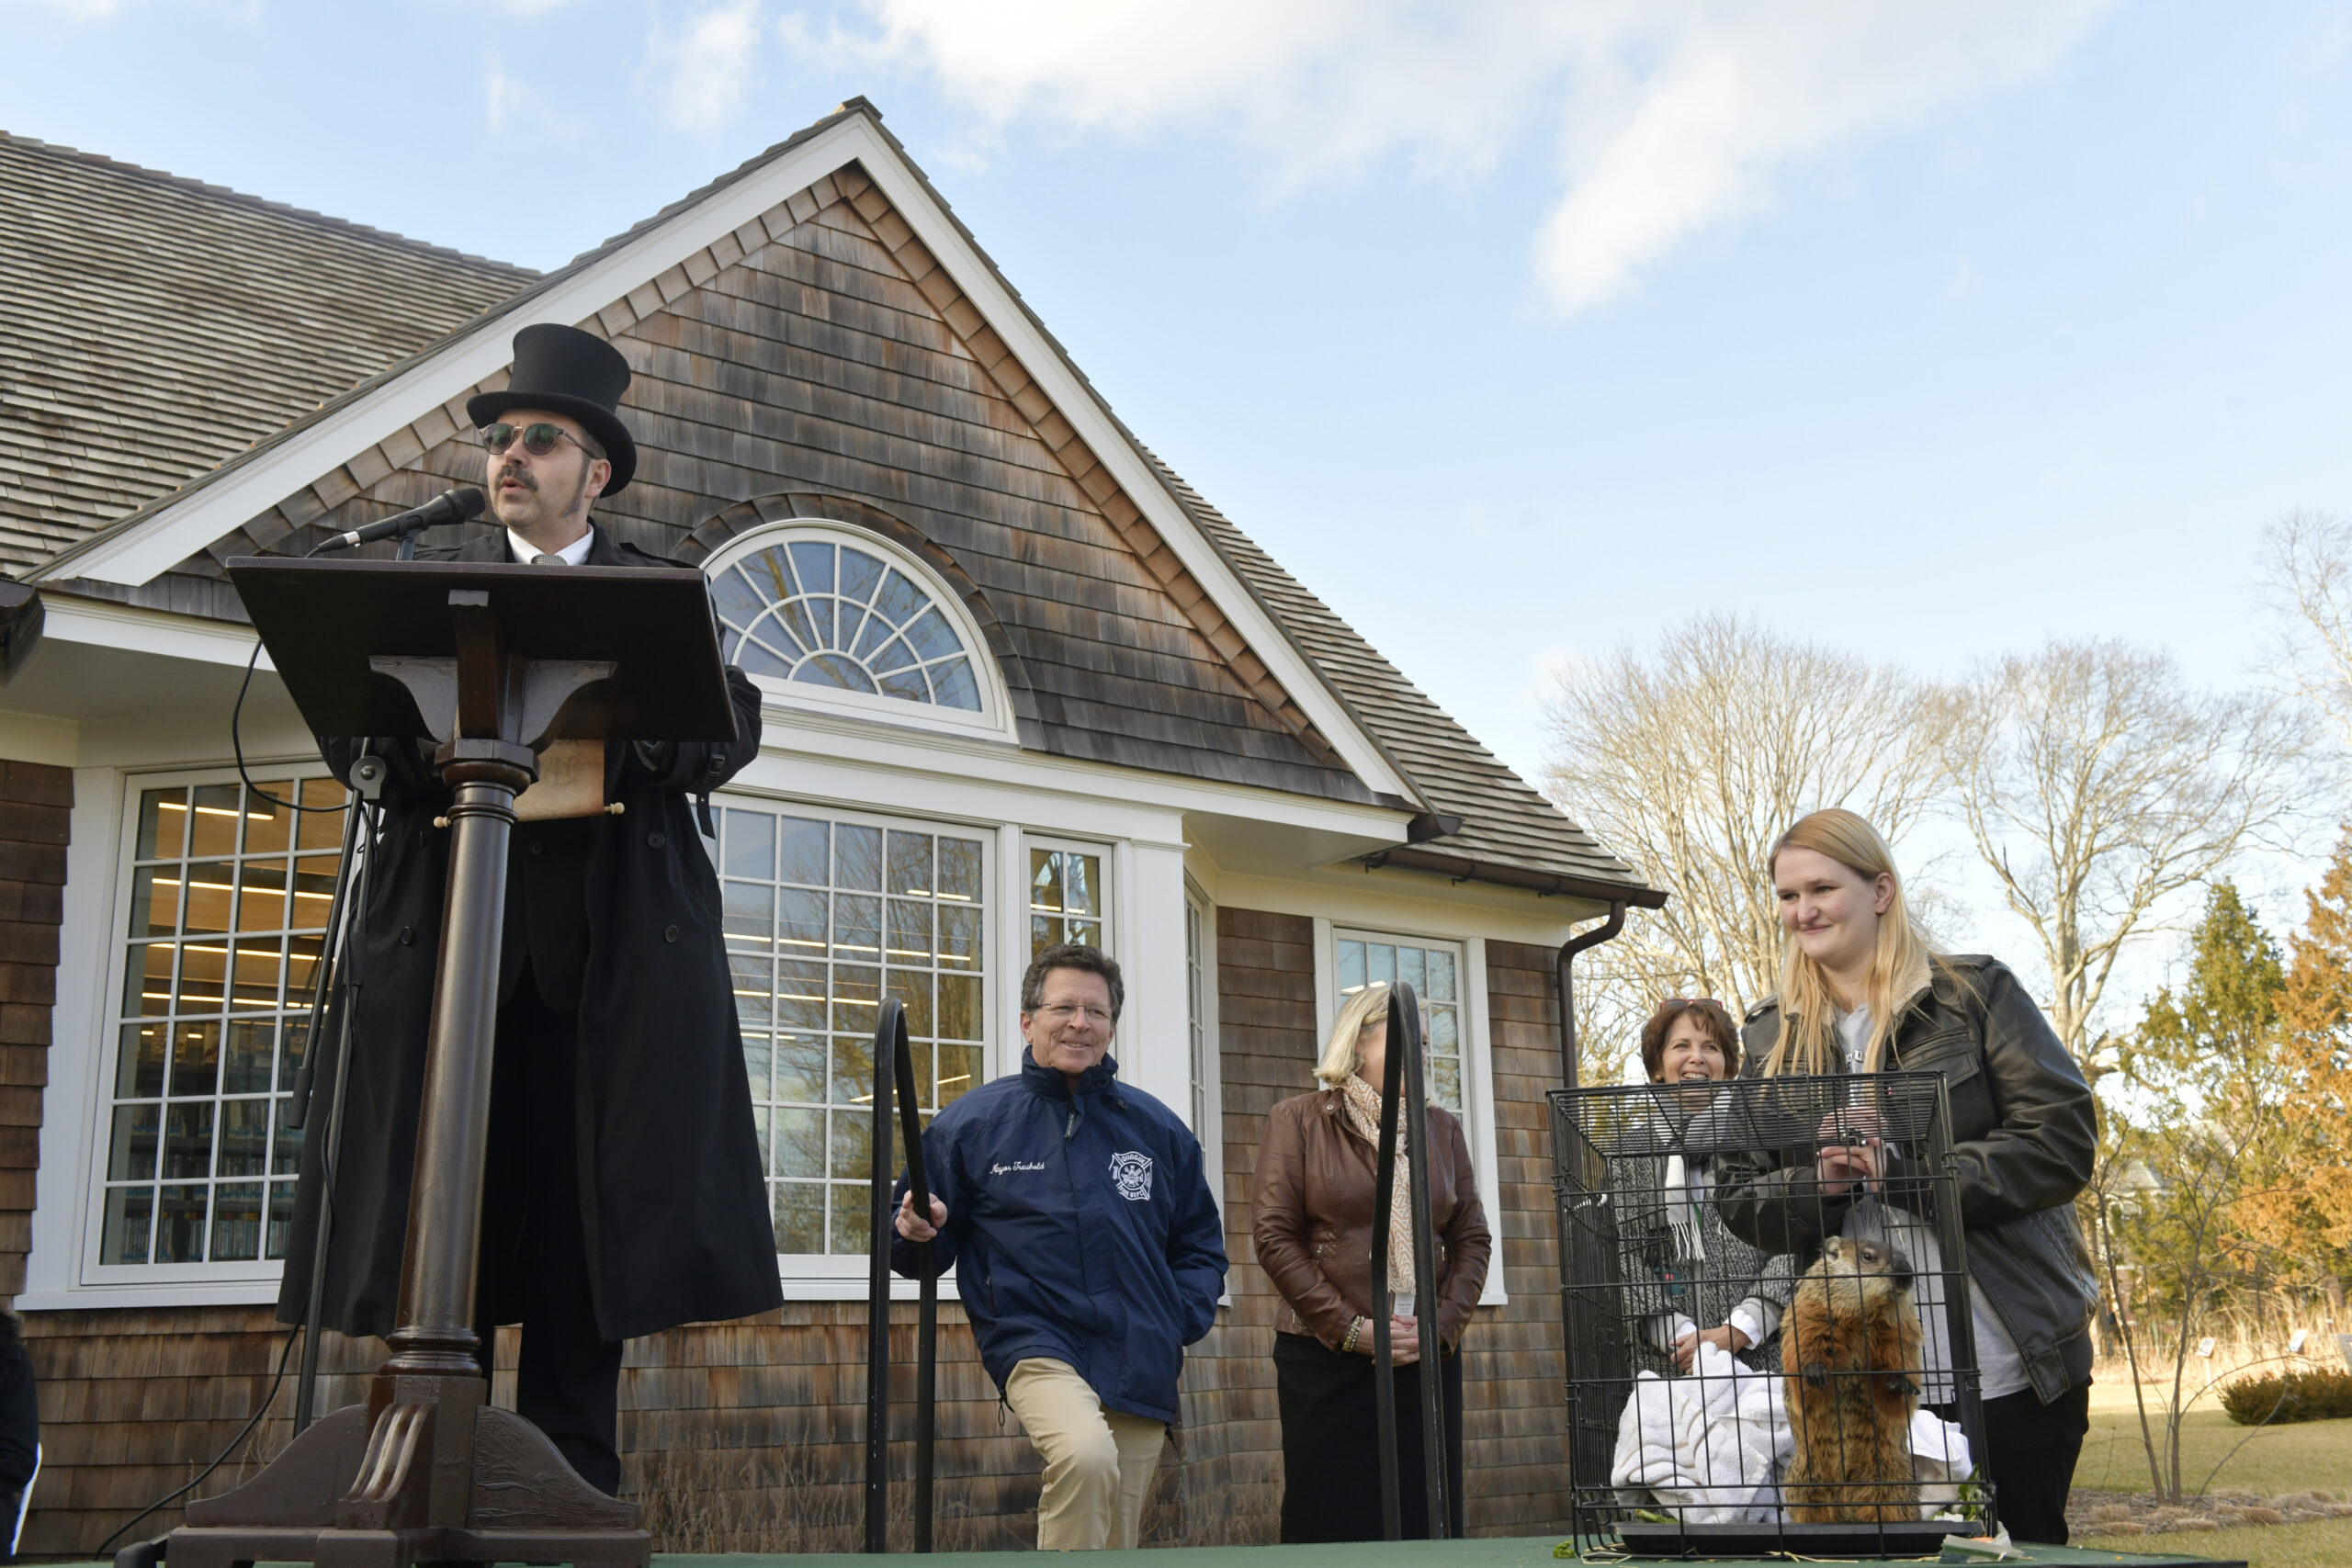 Master of Ceremonies Tim Walkman announces groundhog Sam Champions prediction at Groundhog Day festivities at the Quogue Library on Thursday afternoon. Sam predicted six more weeks of winter.   DANA SHAW